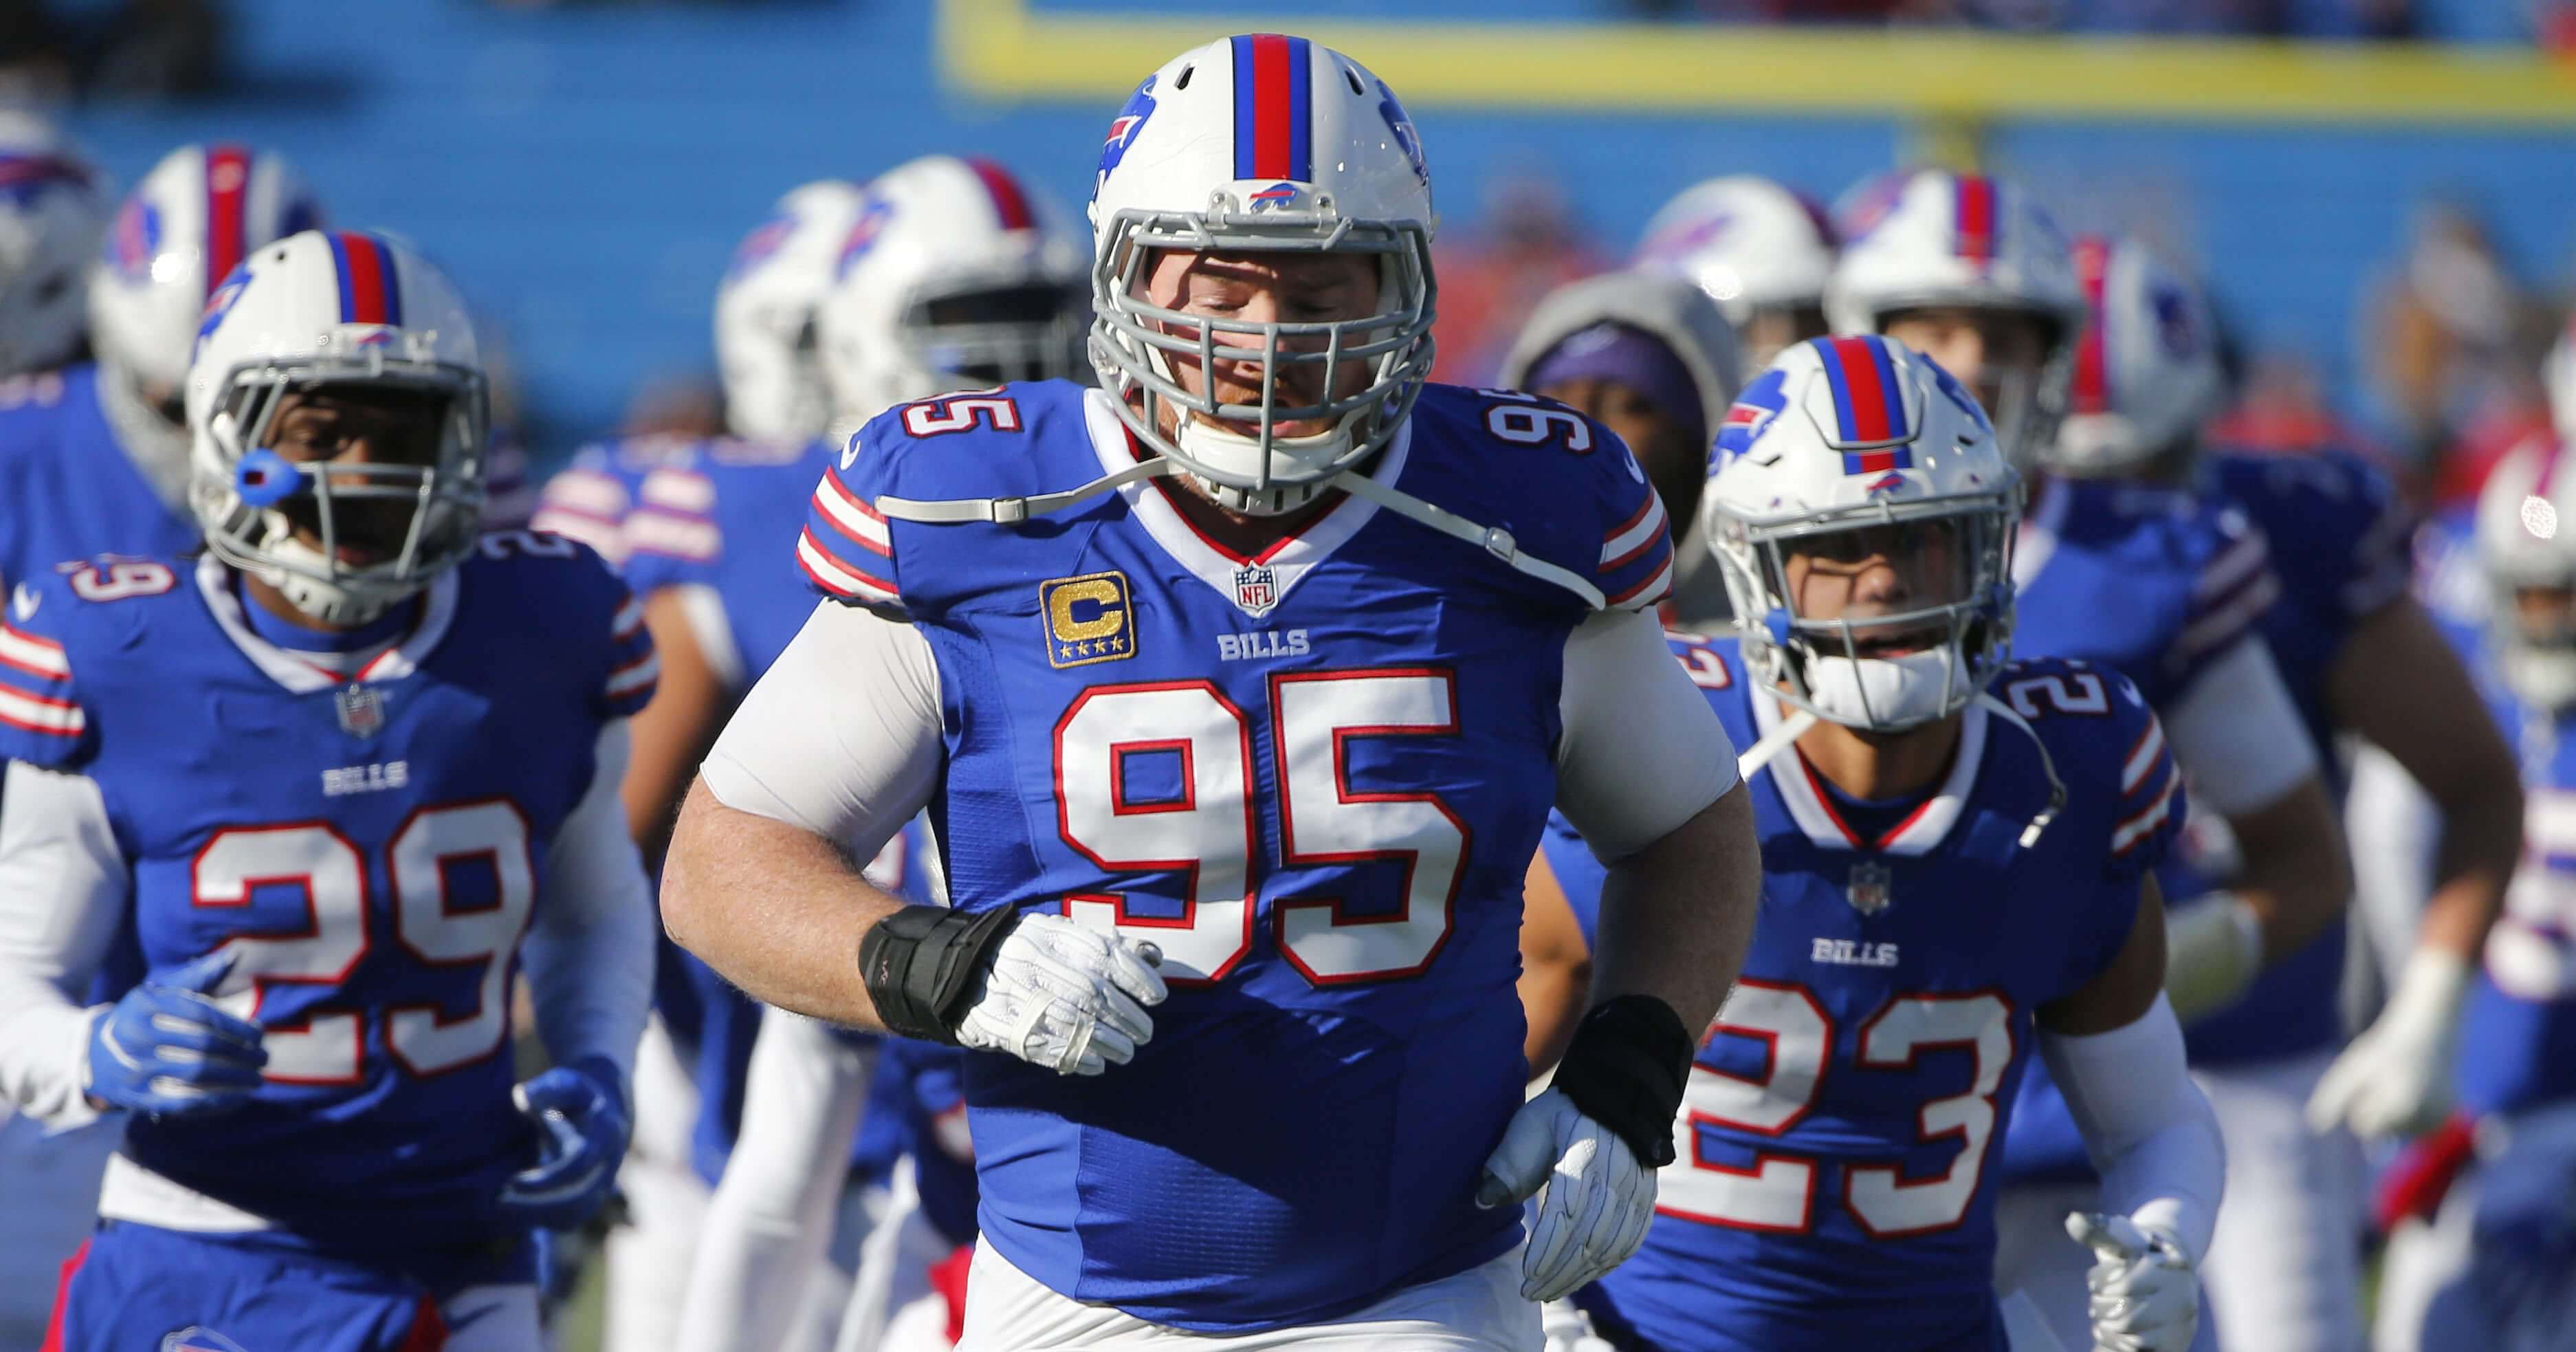 Buffalo Bills defensive tackle Kyle Williams (95) warms up before a Dec. 9 game against the New York Jets in Orchard Park.